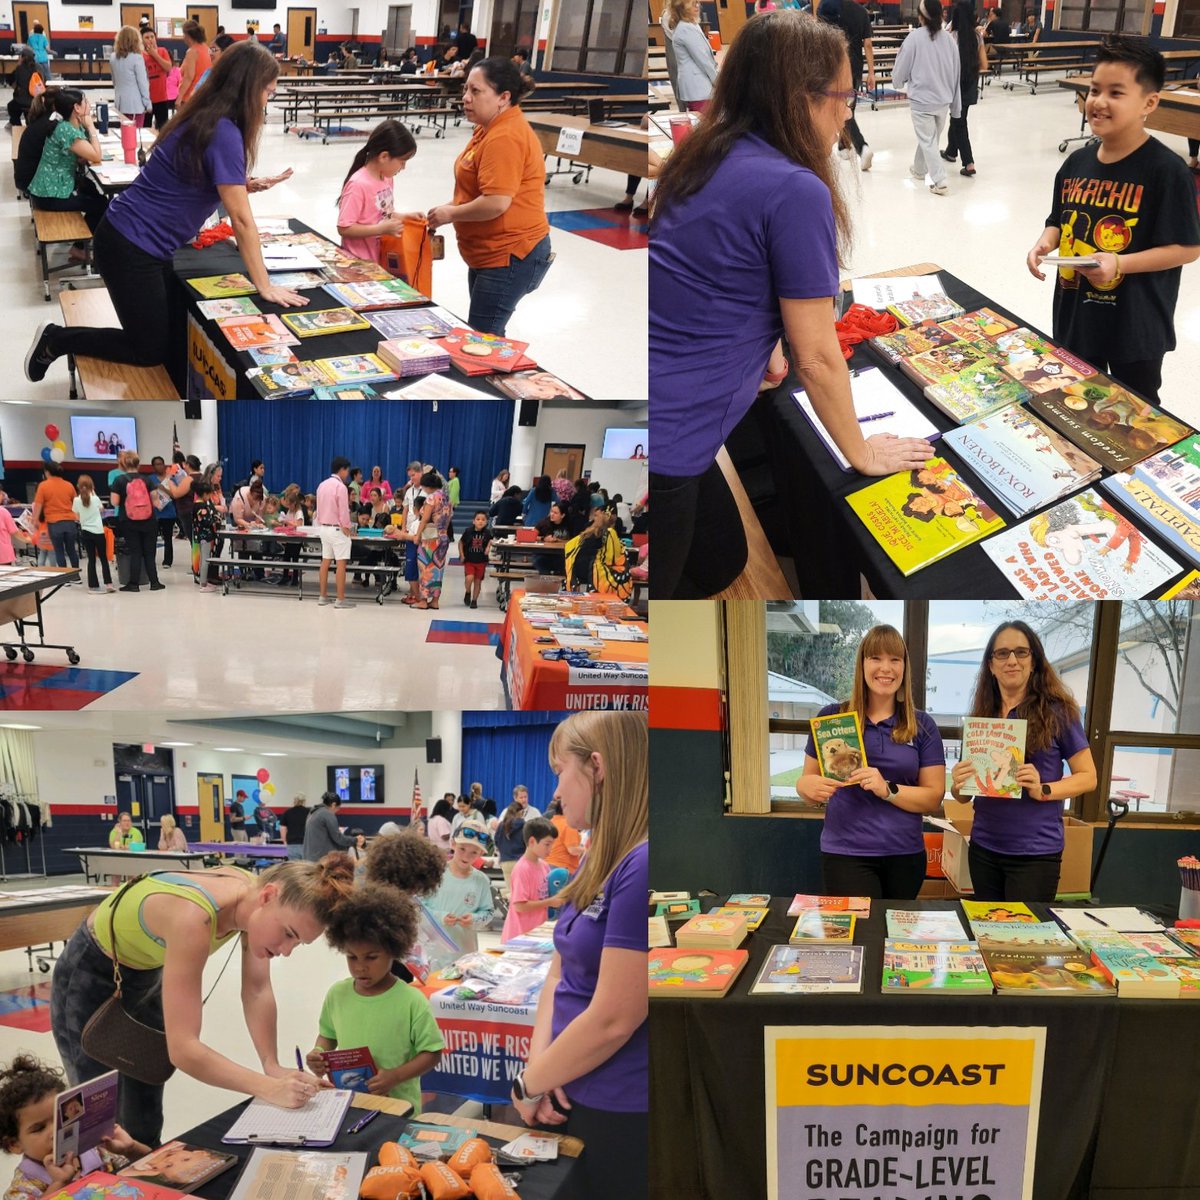 We are having a blast at the Palmview Family Night! 
Food, activities, and prizes! 
@SuncoastCGLR, @readingby3rd, @JoinVroom @LeerPara3ro @cmileytpf
#GLReading #ParentEngagement #SchoolReadiness #LeerPara3ro